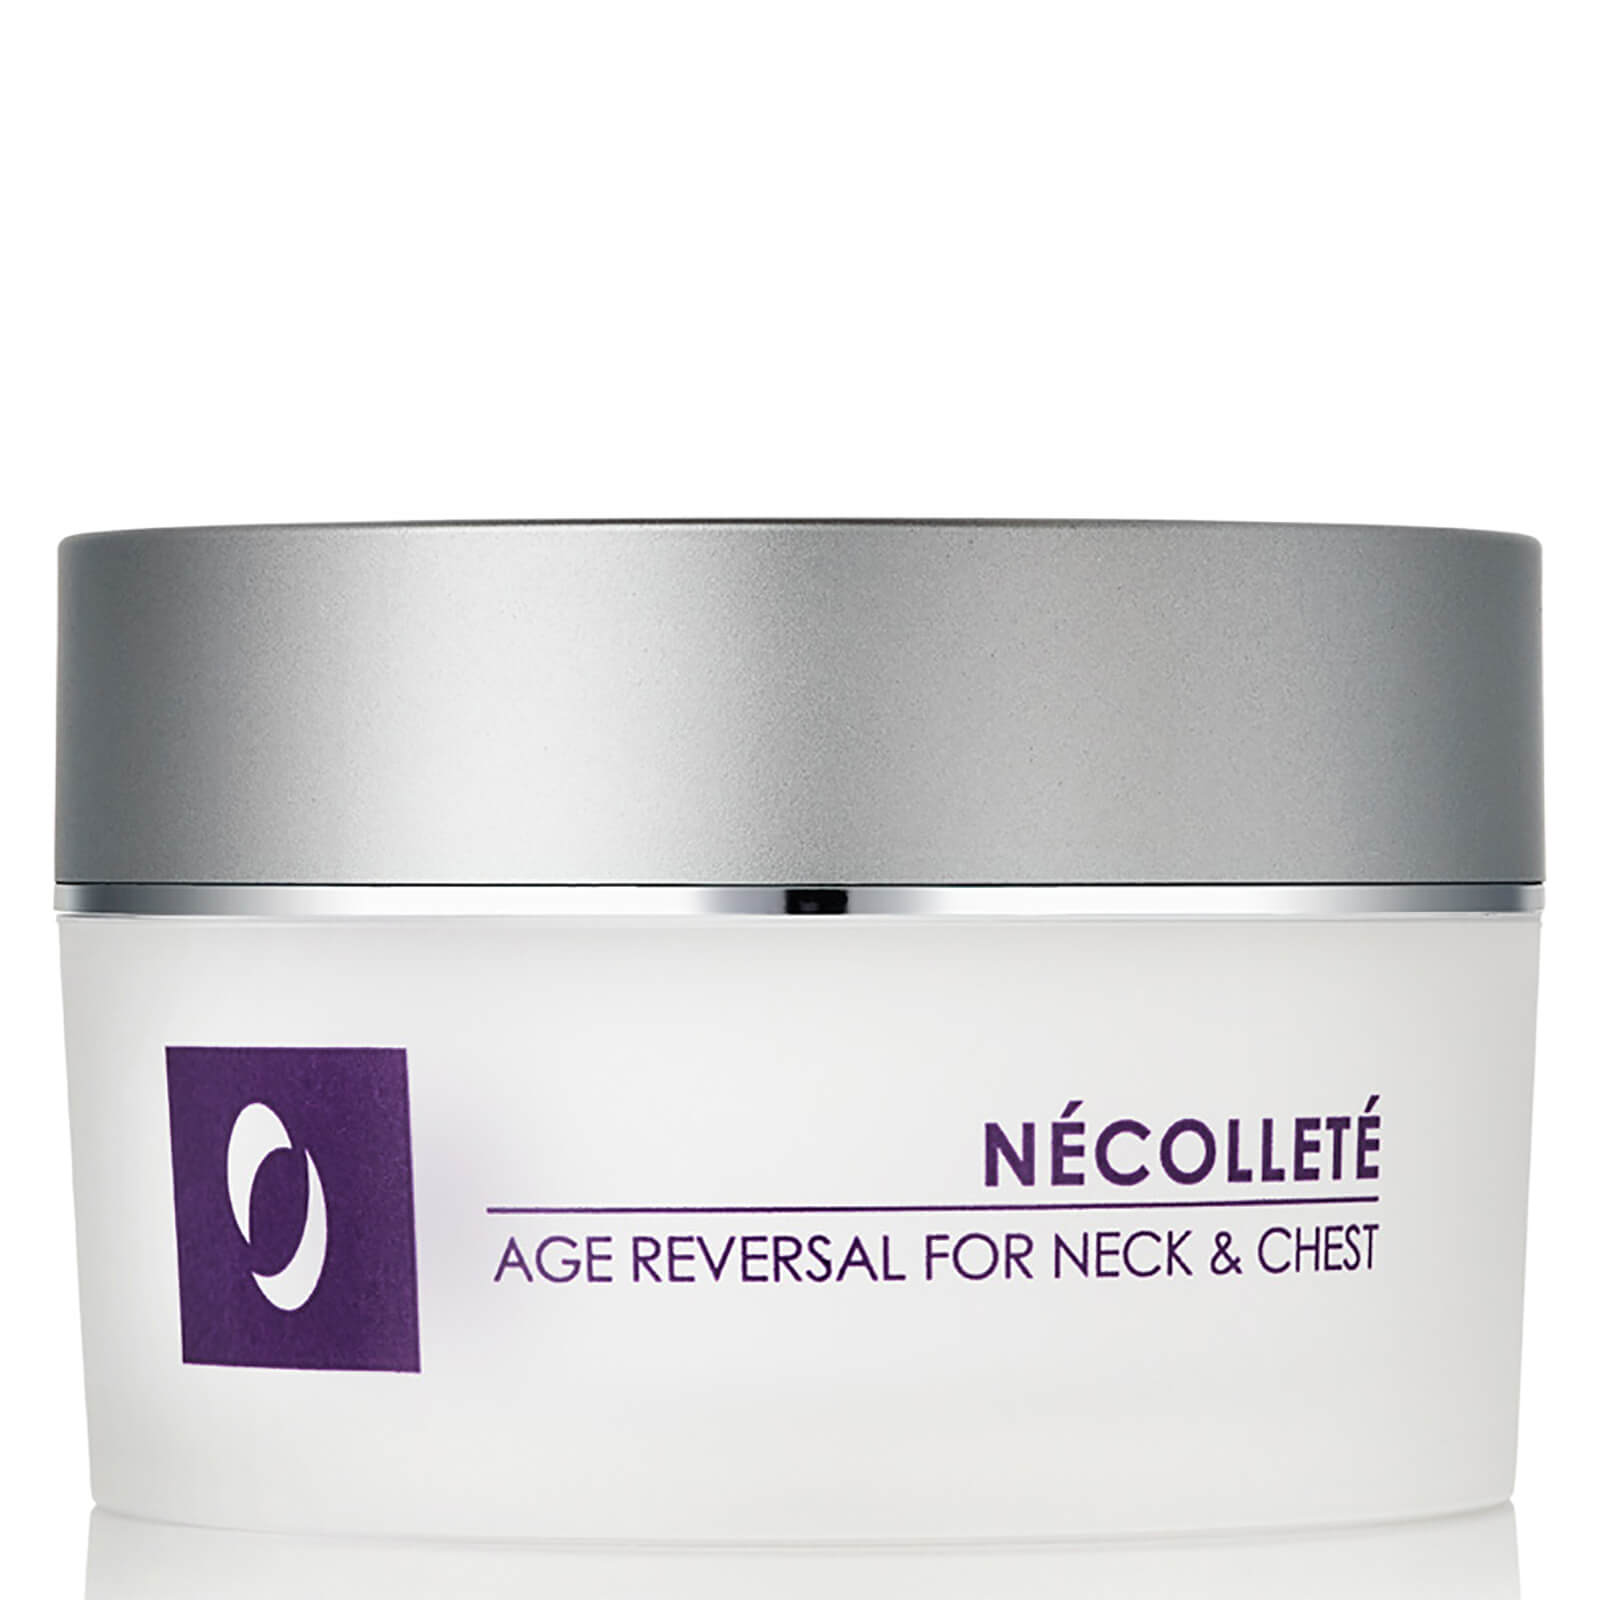 OSMOTICS COSMECEUTICALS OSMOTICS NECOLLETE AGE REVERSAL FOR NECK AND CHEST,5465